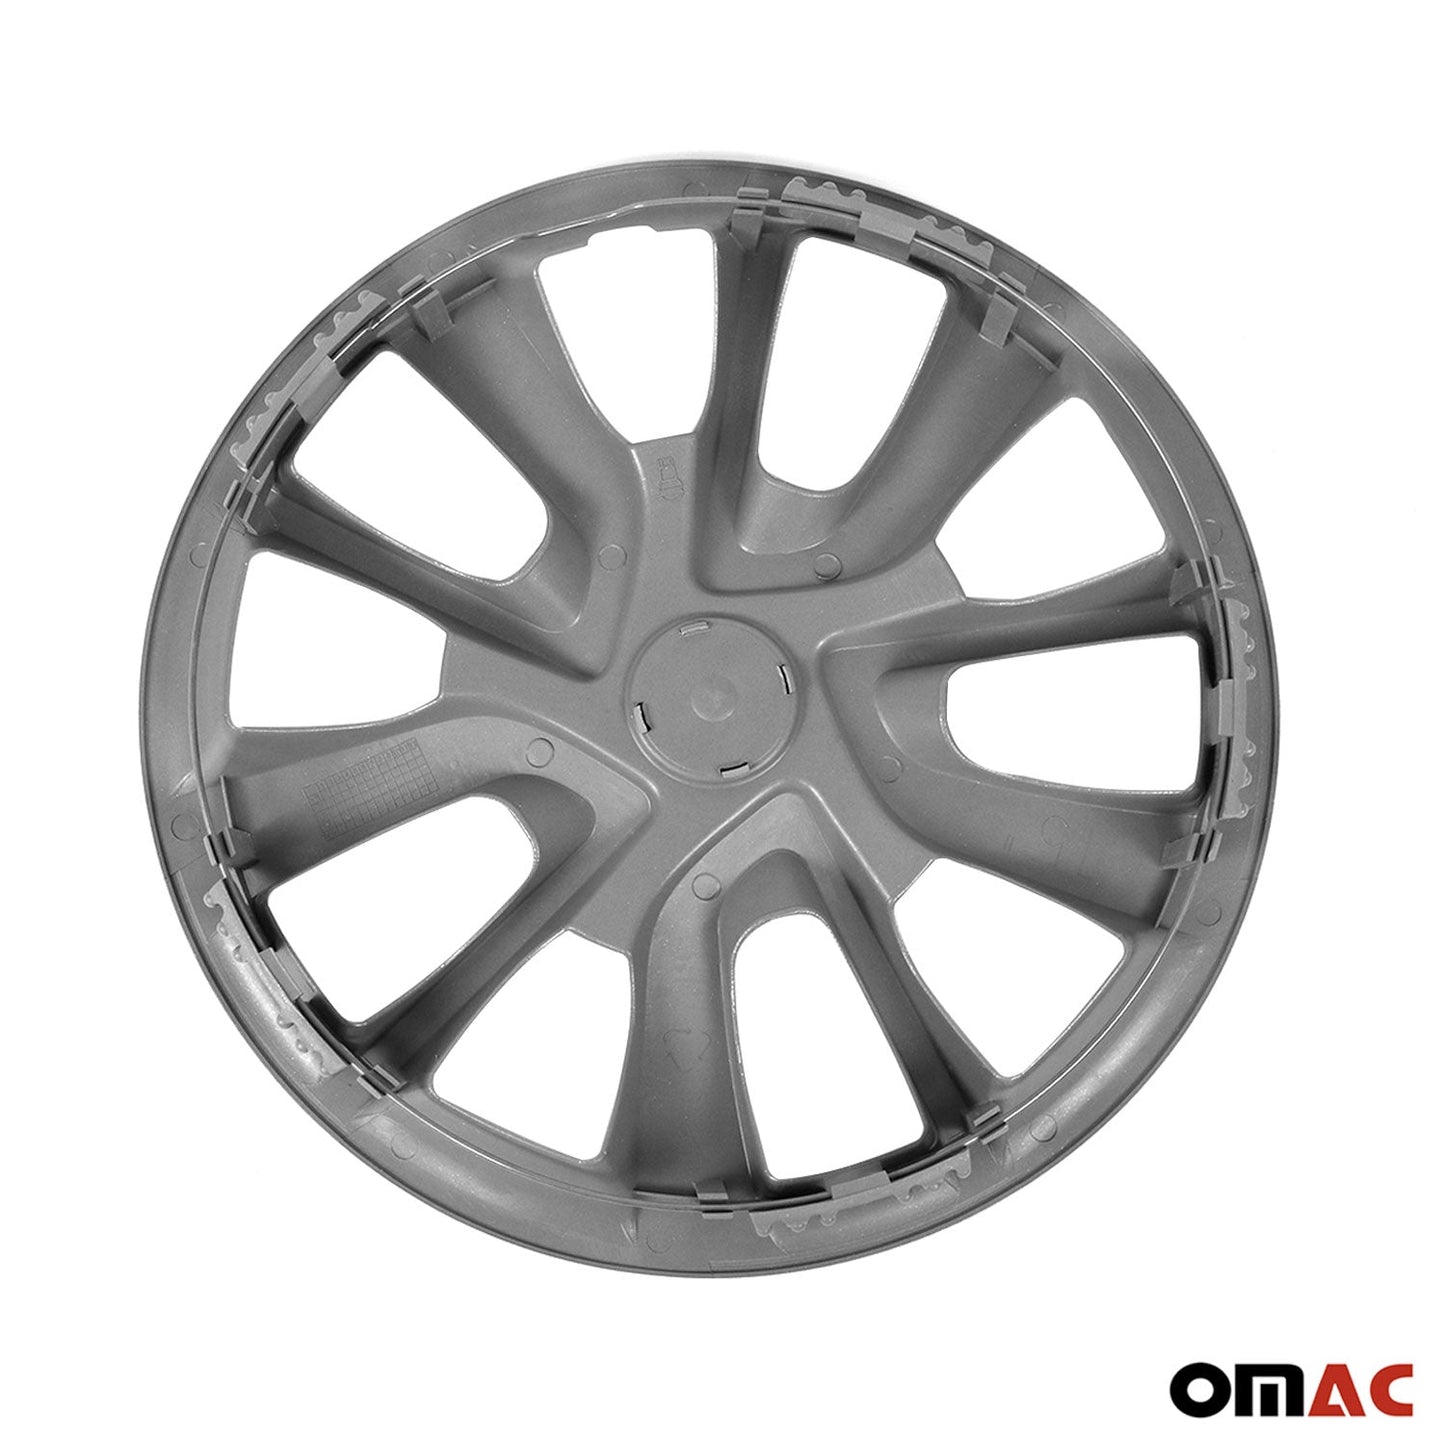 OMAC 15 Inch Wheel Covers Hubcaps for Smart Silver Gray U029211